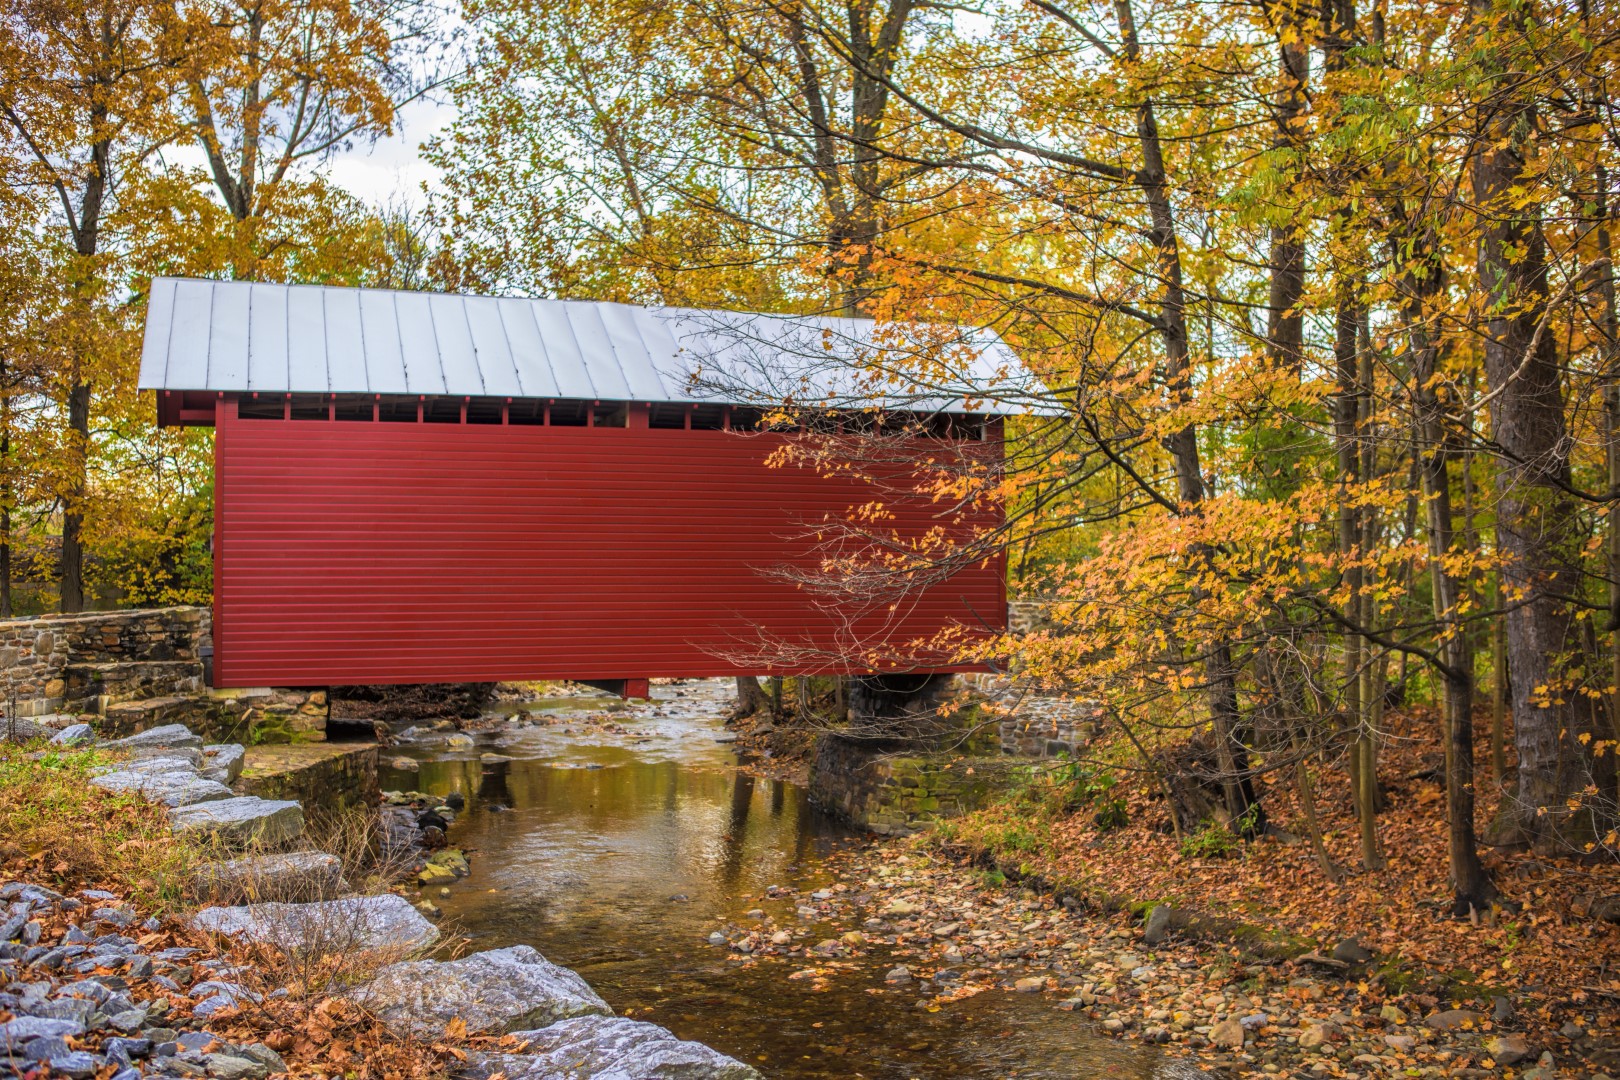 Roddy Road Covered Bridge in Thurmont Maryland